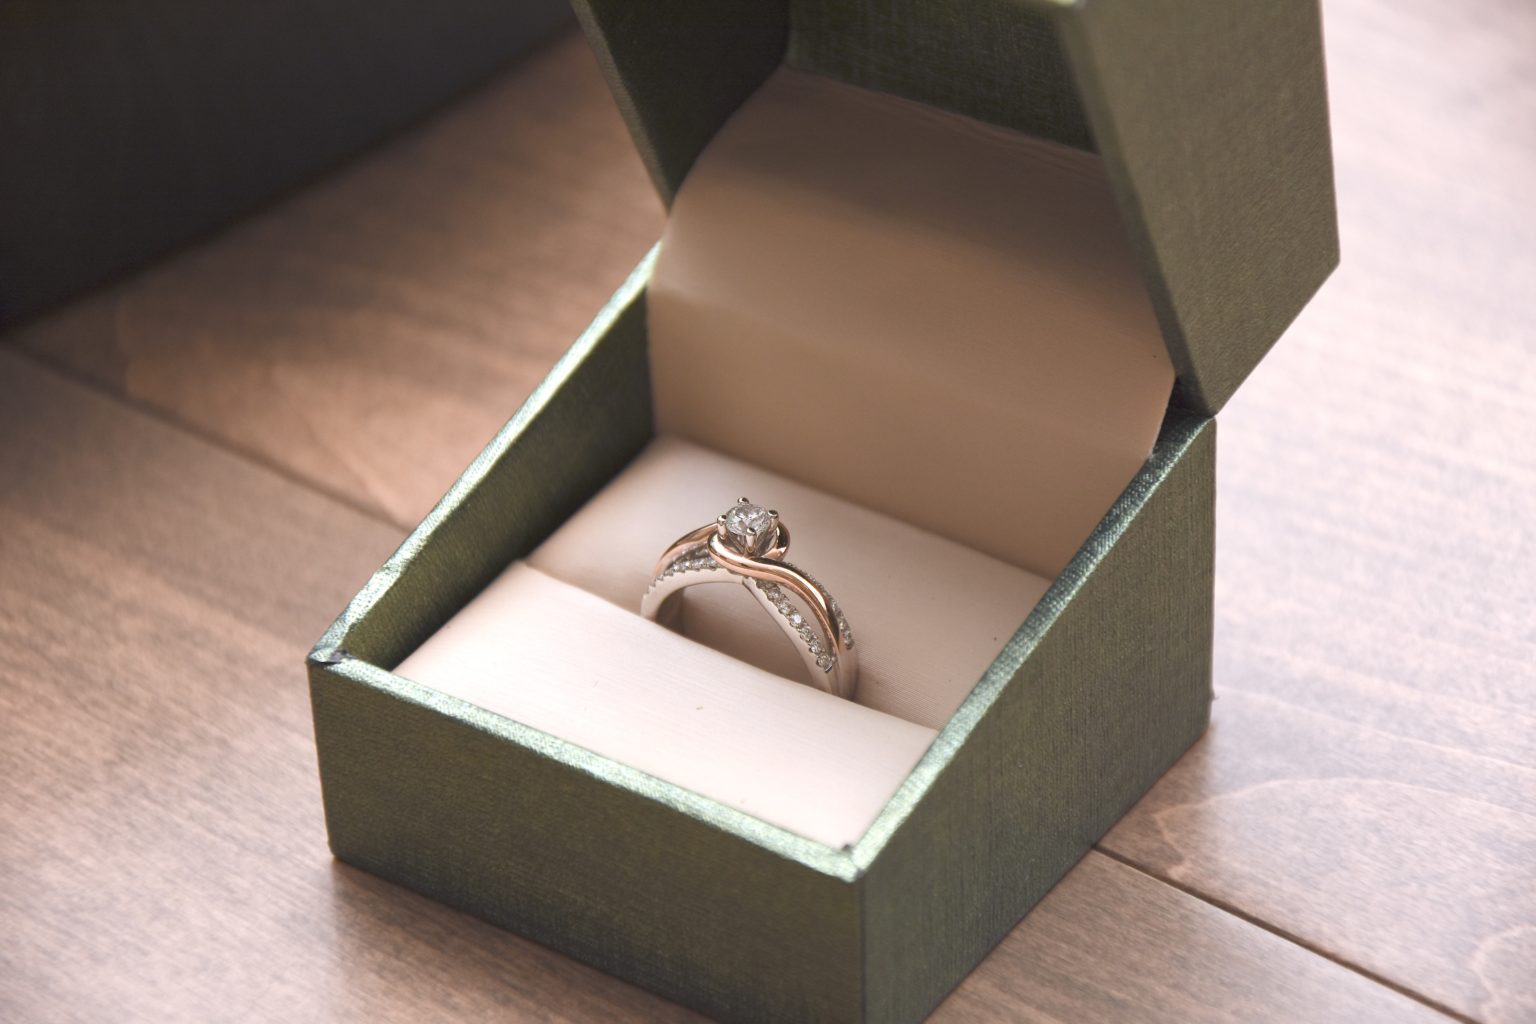 How to Pick the Right Engagement Ring Size